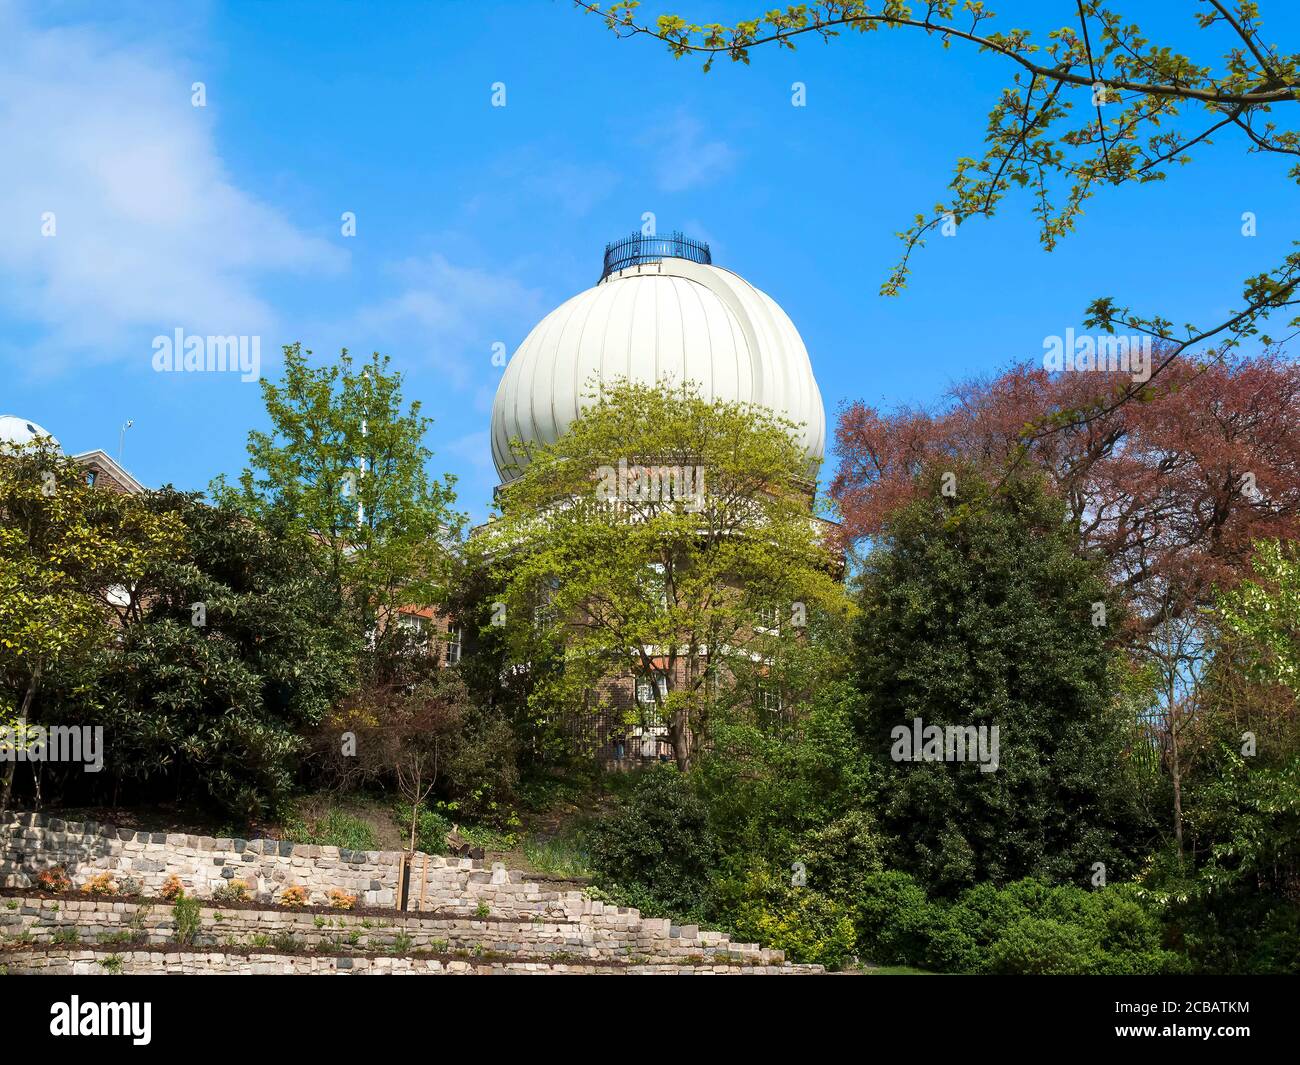 The Royal Observatory museum in Greenwich London England UK a Victorian 19th century building which is a popular travel destination tourist attraction Stock Photo